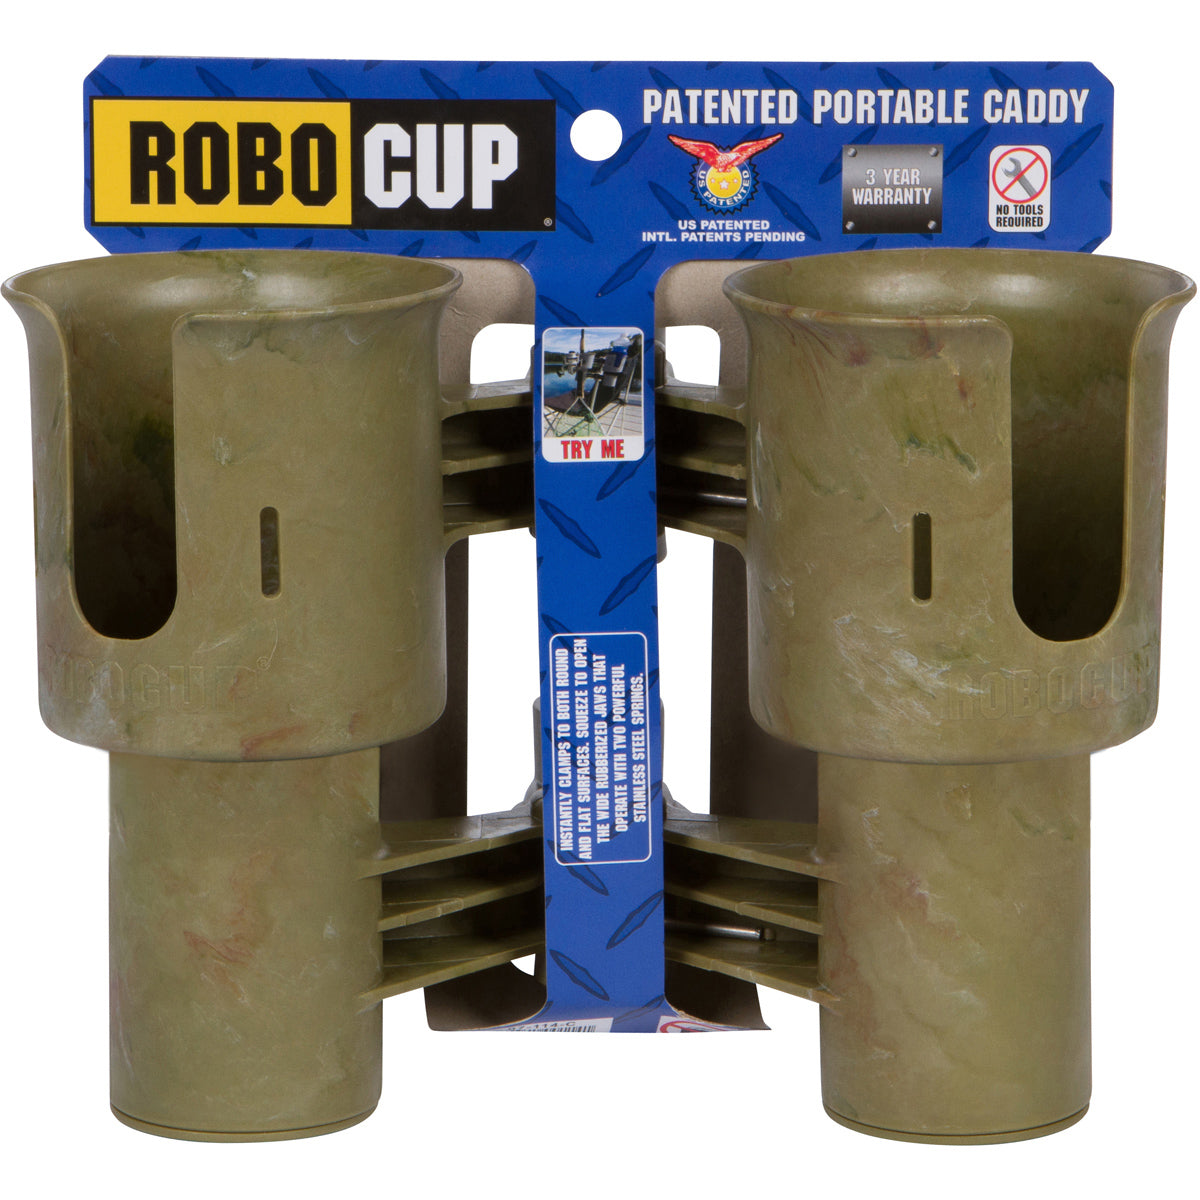 RoboCup CAMO Patented Clamp on Caddy Dual Cup, Drink & Rod Holder